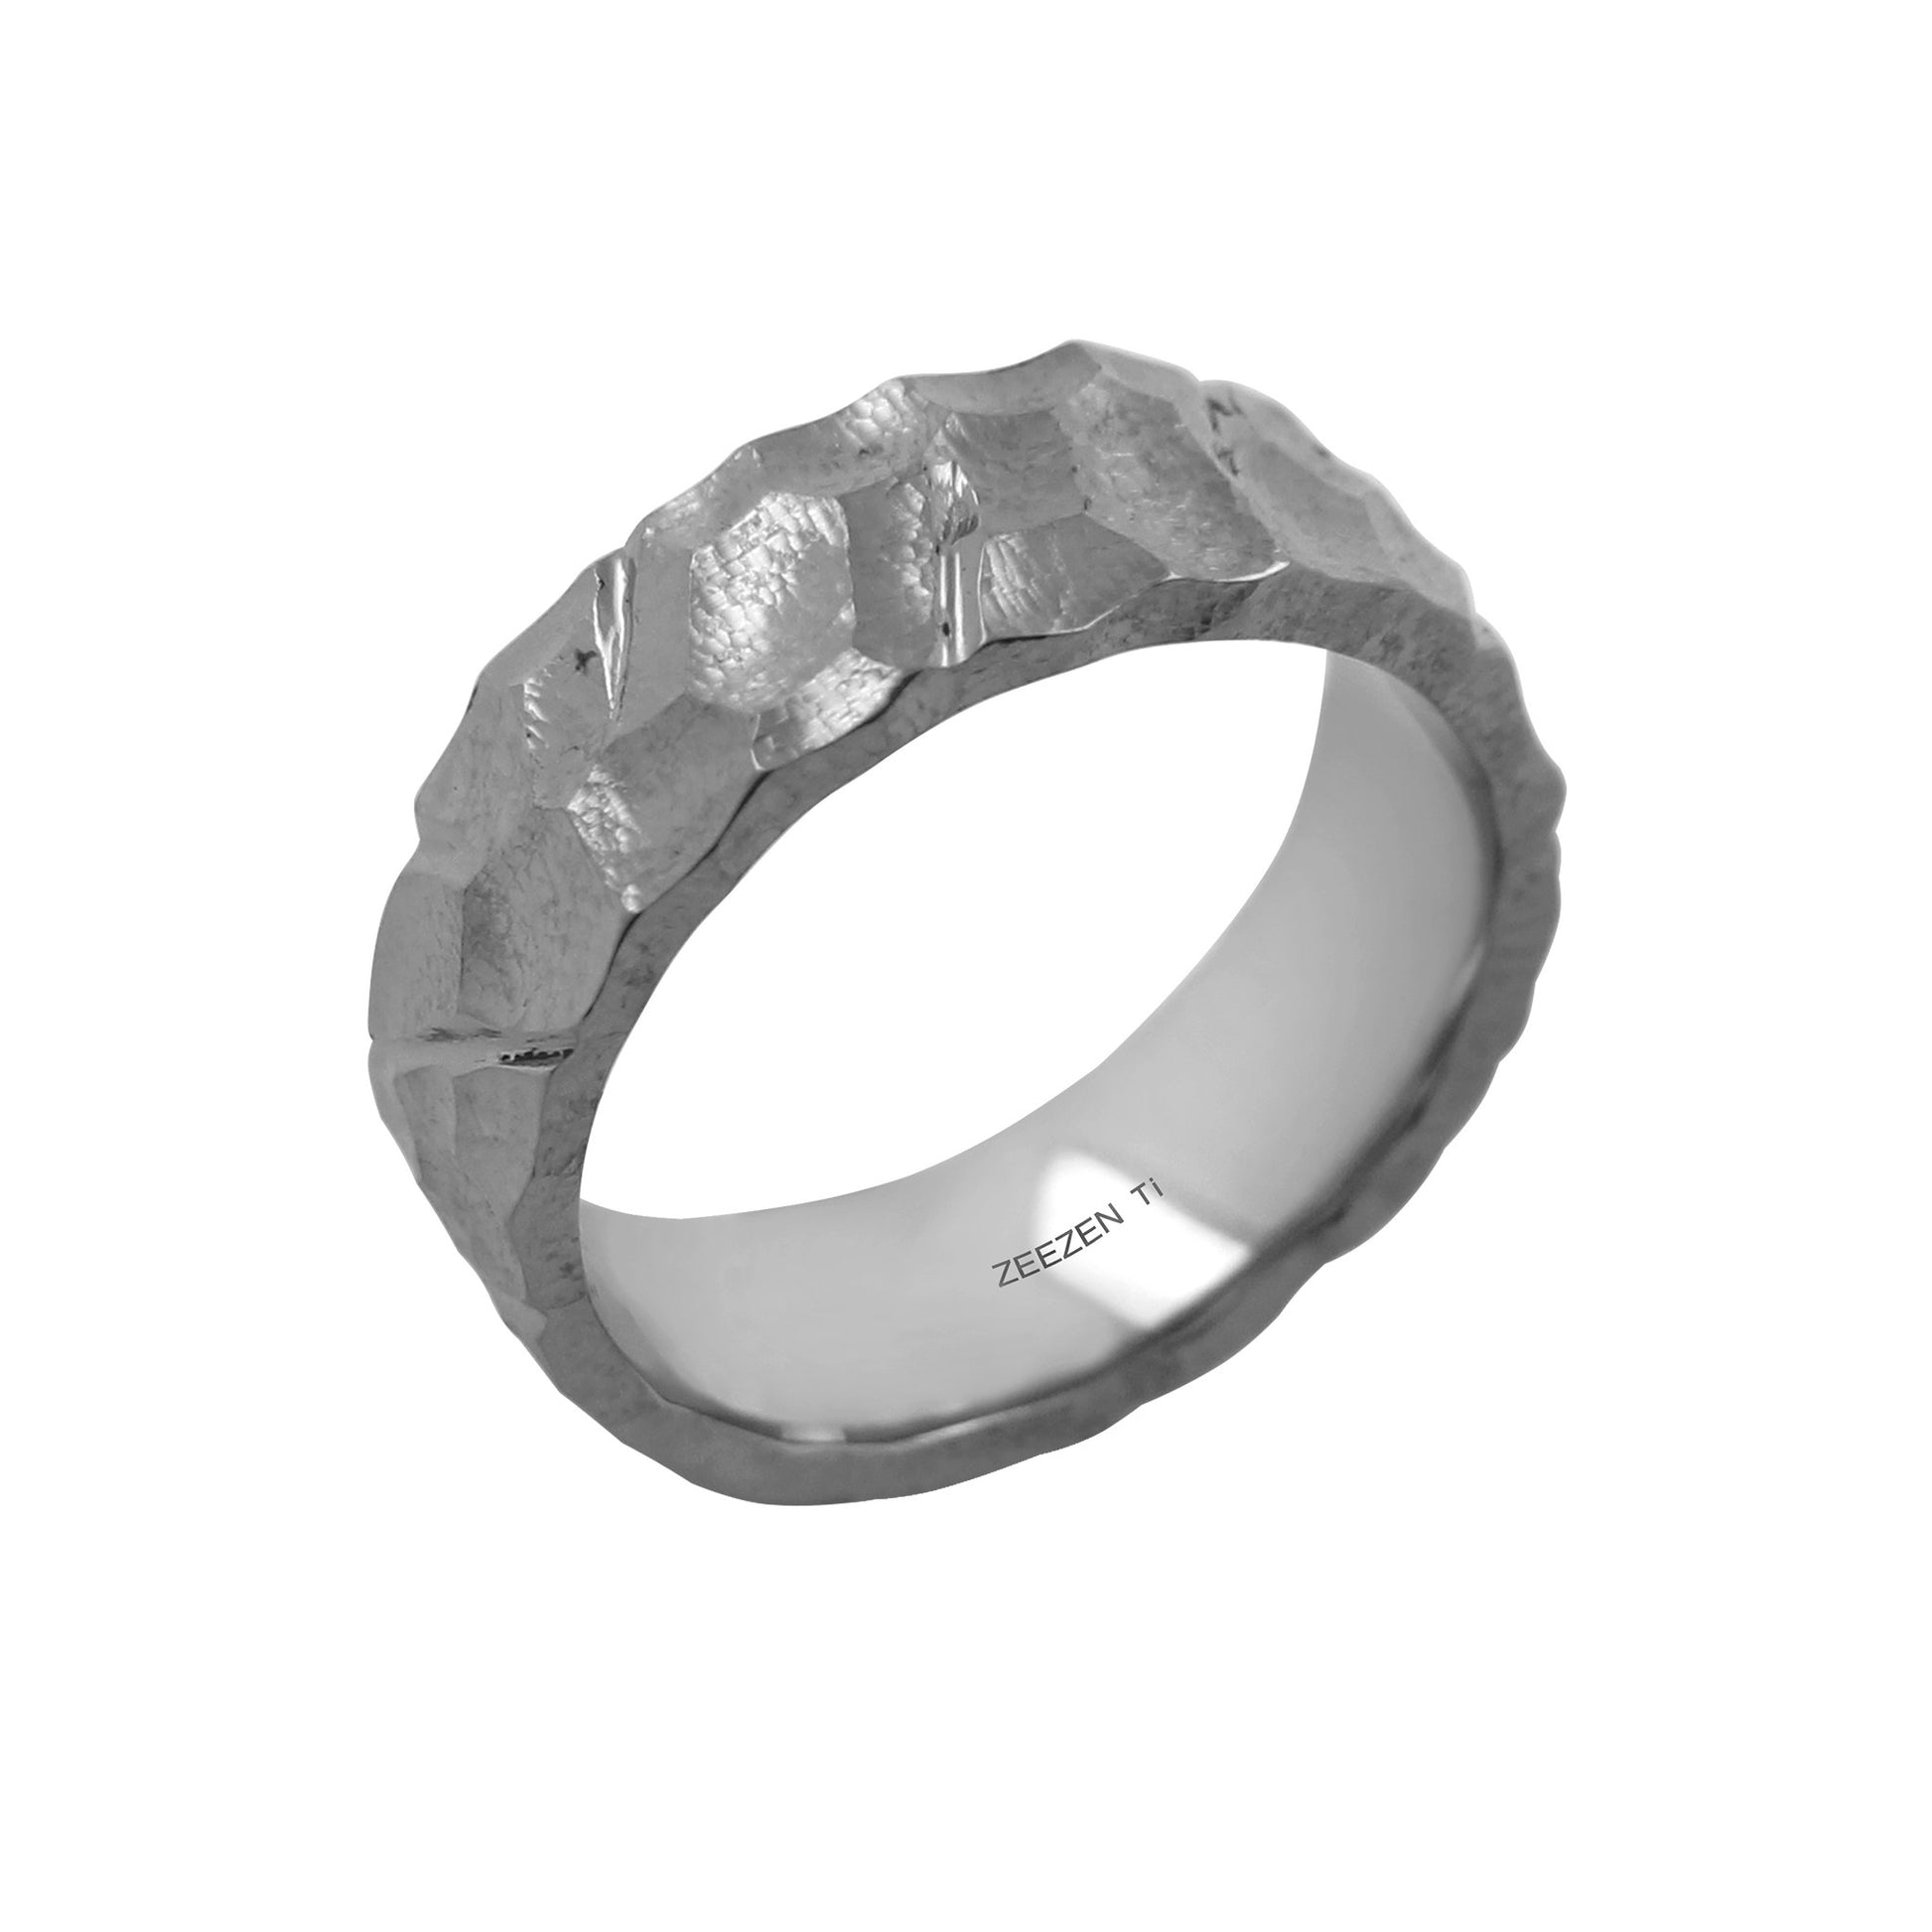 Tantalum Ring w/o min. Boundary/Polished(Cut). Tantalum ring with rock-like texture. Ring profile: width: 8.0 mm || height: 2.5 mm. Side view.